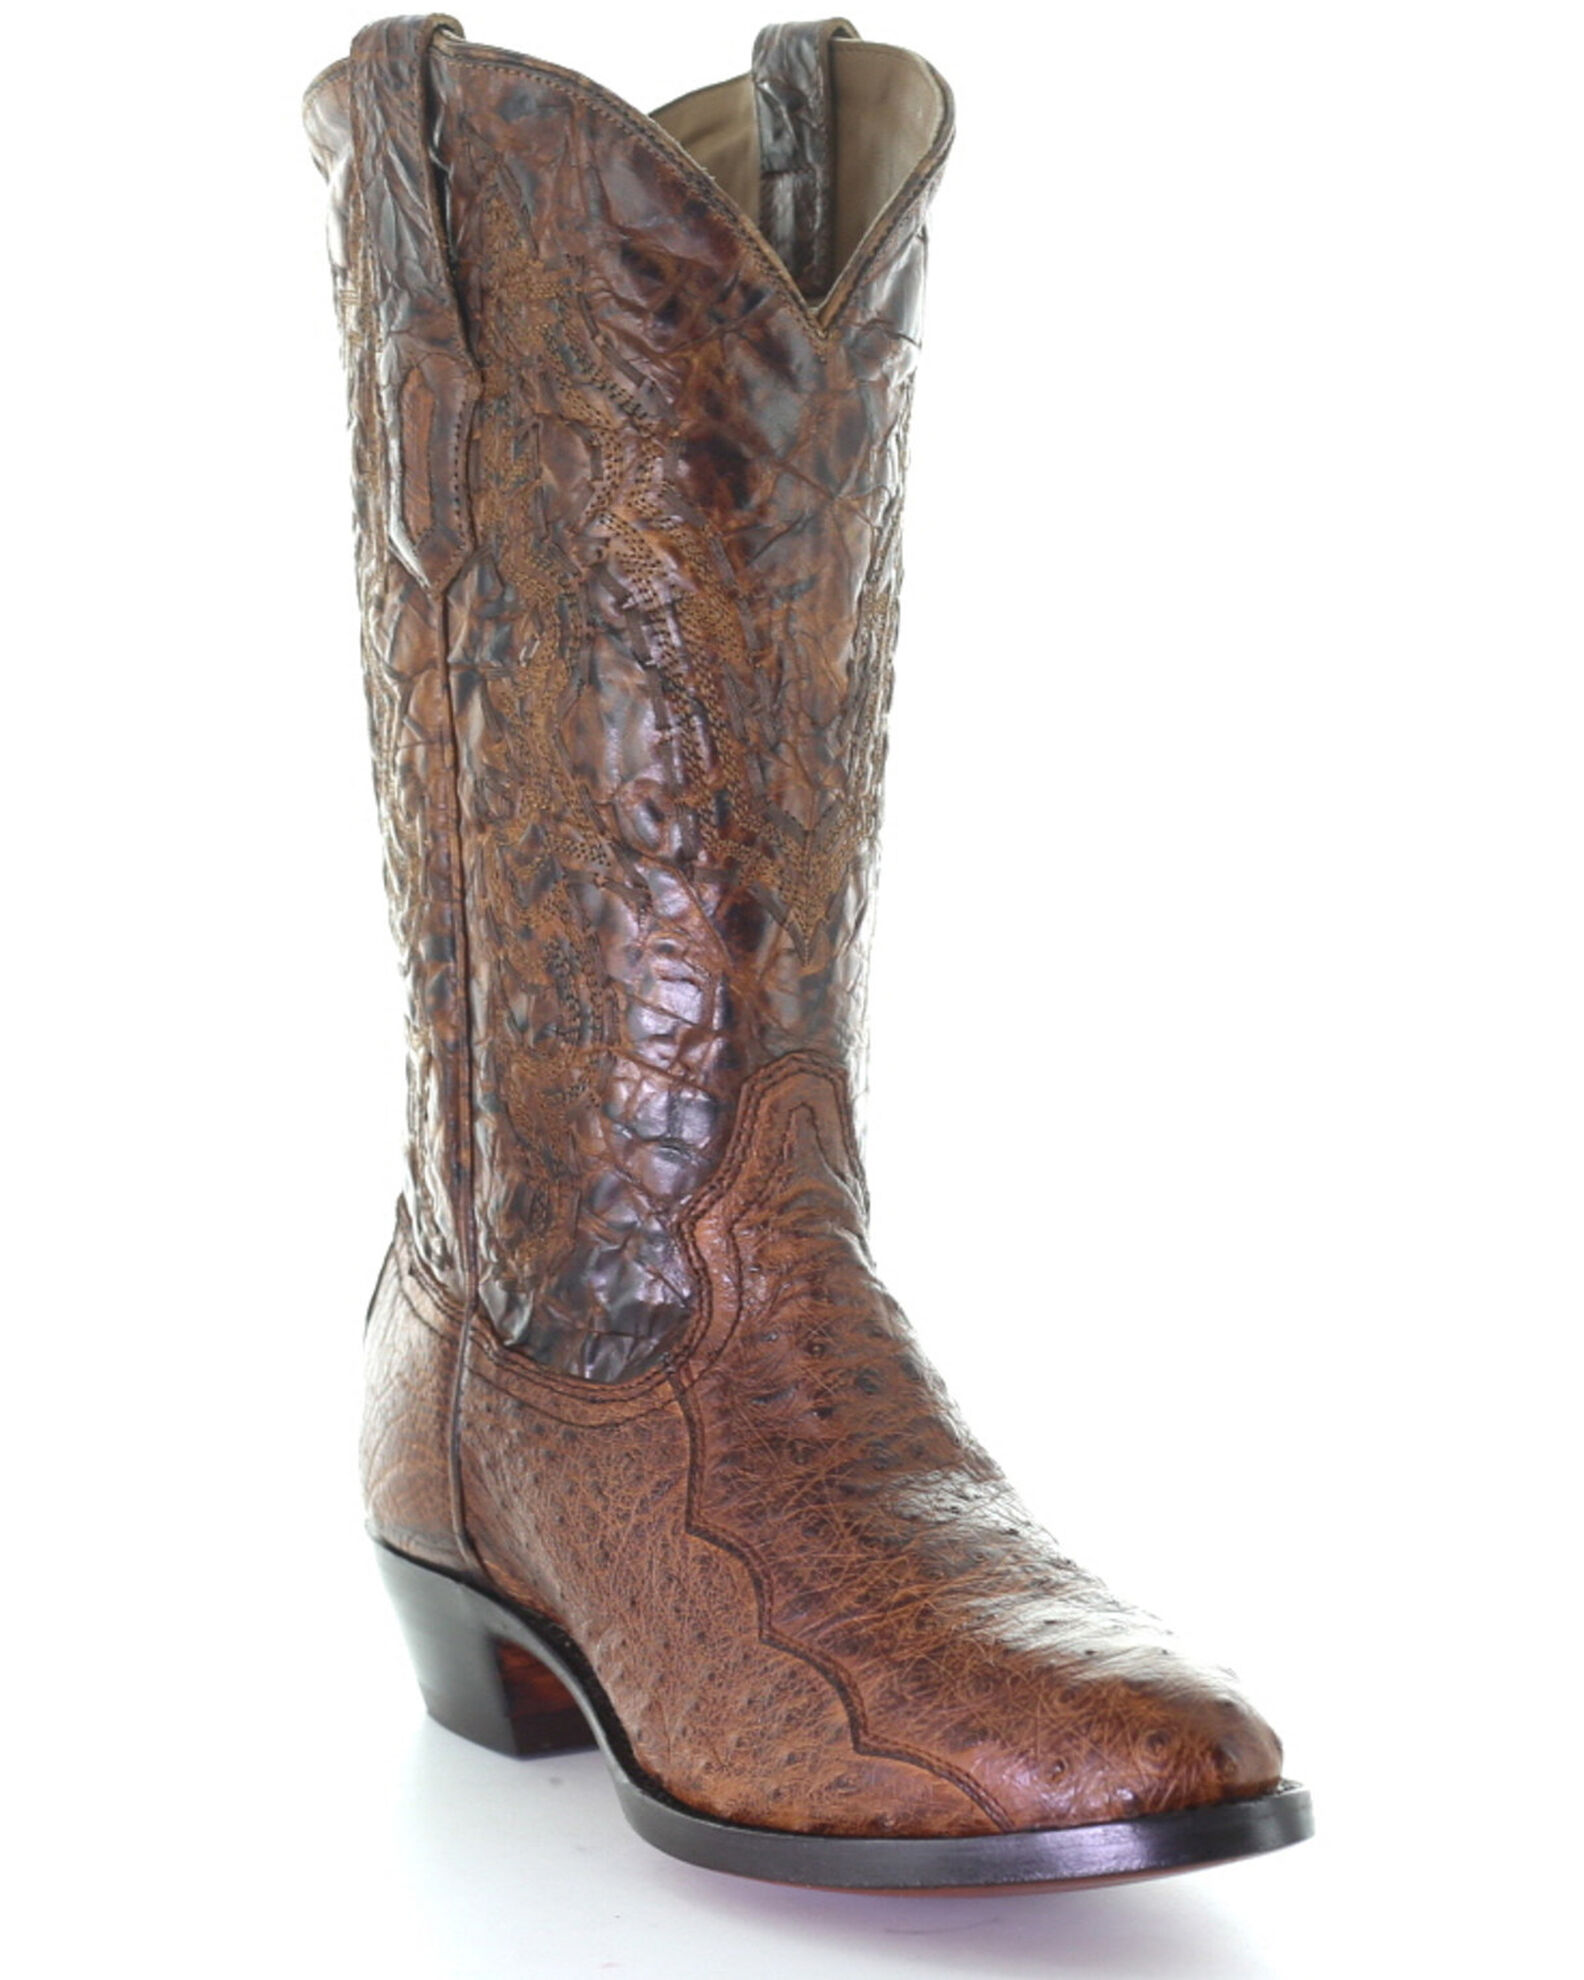 Corral Men's Exotic Ostrich Western Boots - Round Toe